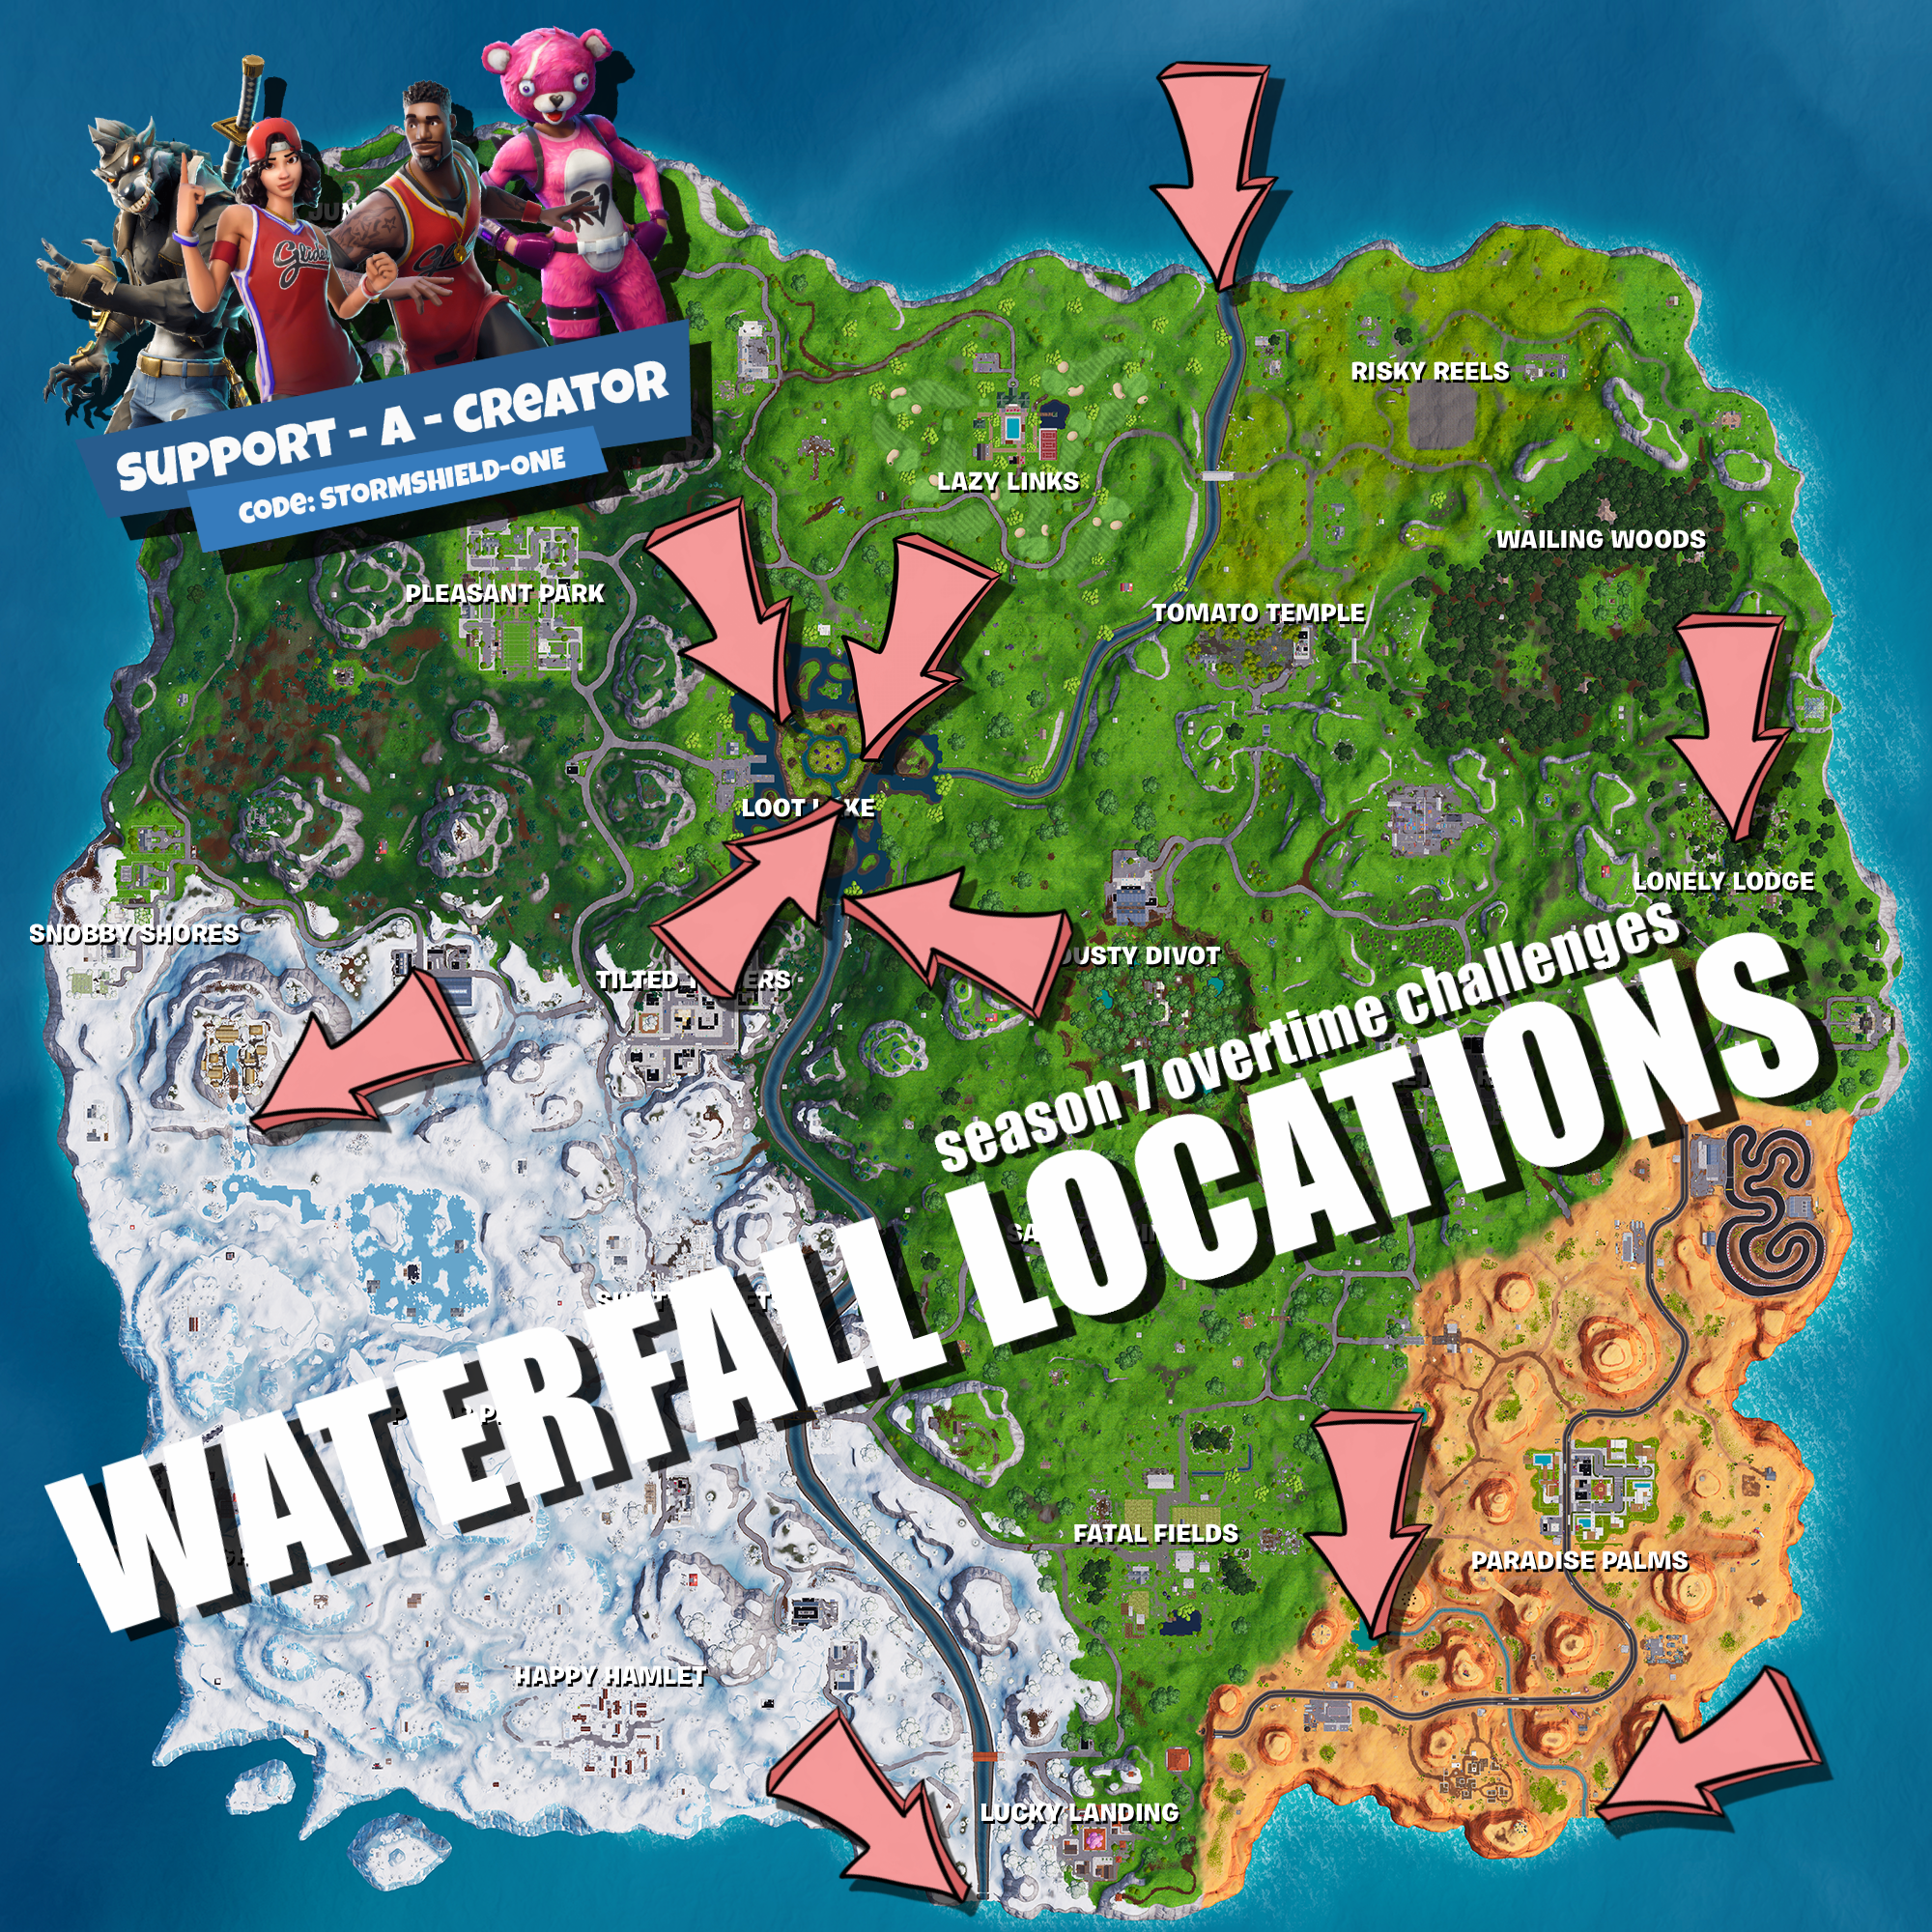 Fortnite Battle Royale Overtime Challenge Maps Fortnite News And - visit 7 different waterfalls right click view image for full resolution